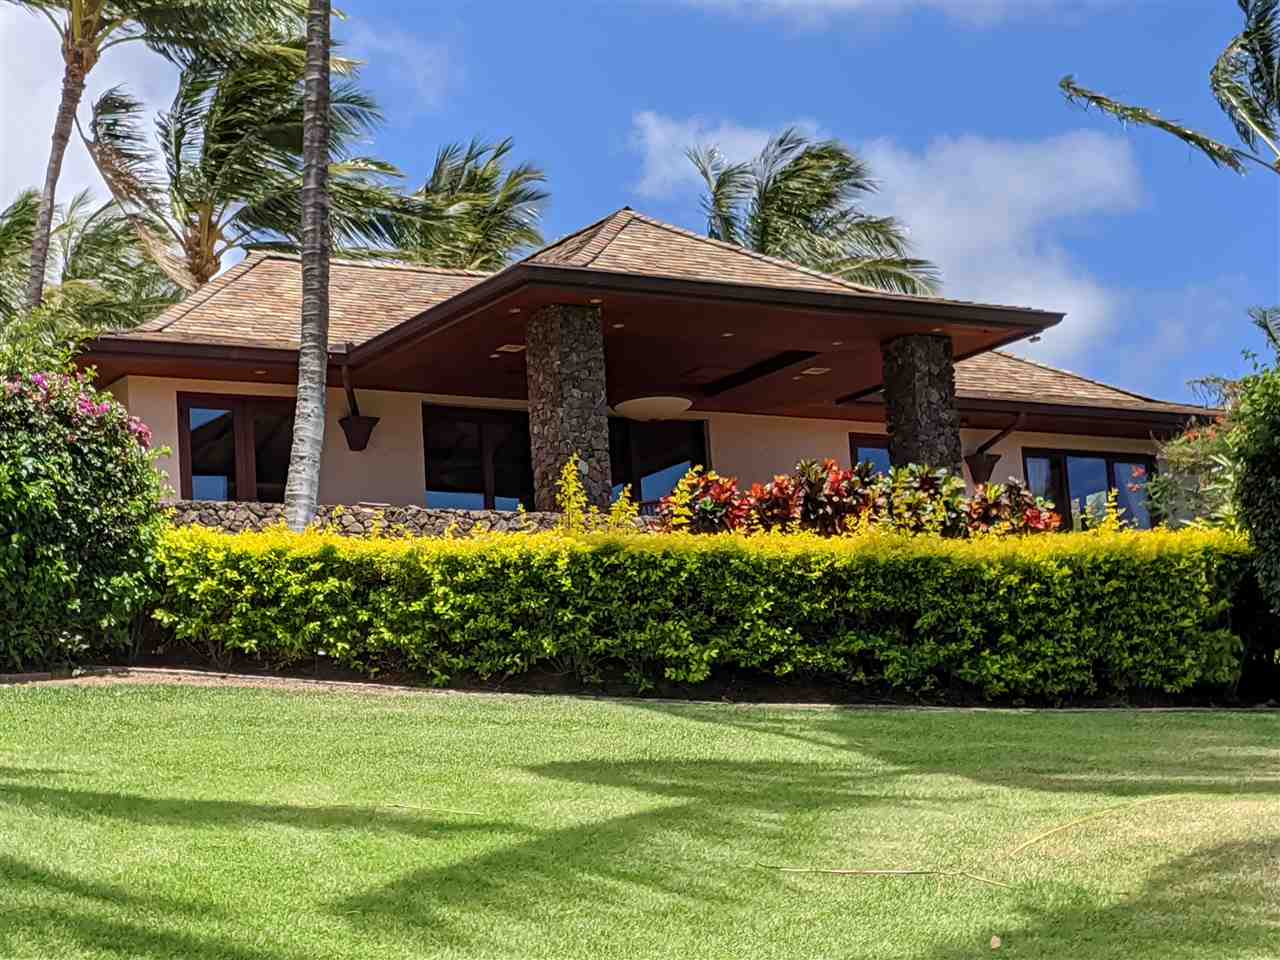 45 Lolii Pl 37 phase 1 Lahaina, Hi vacant land for sale - photo 4 of 13